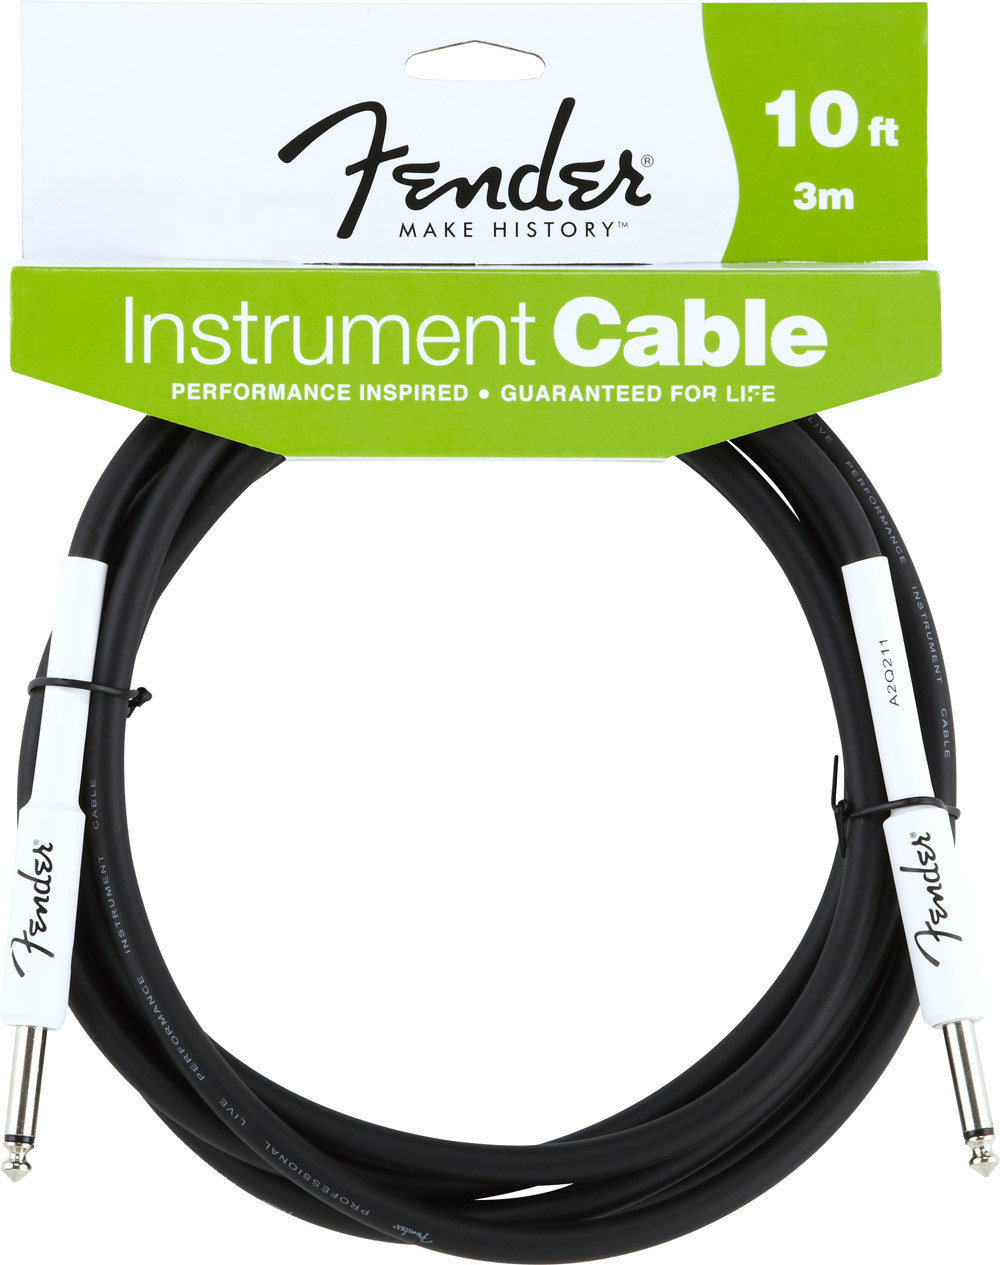 Instrument Cable Fender Performance Series Cable 3m BLK